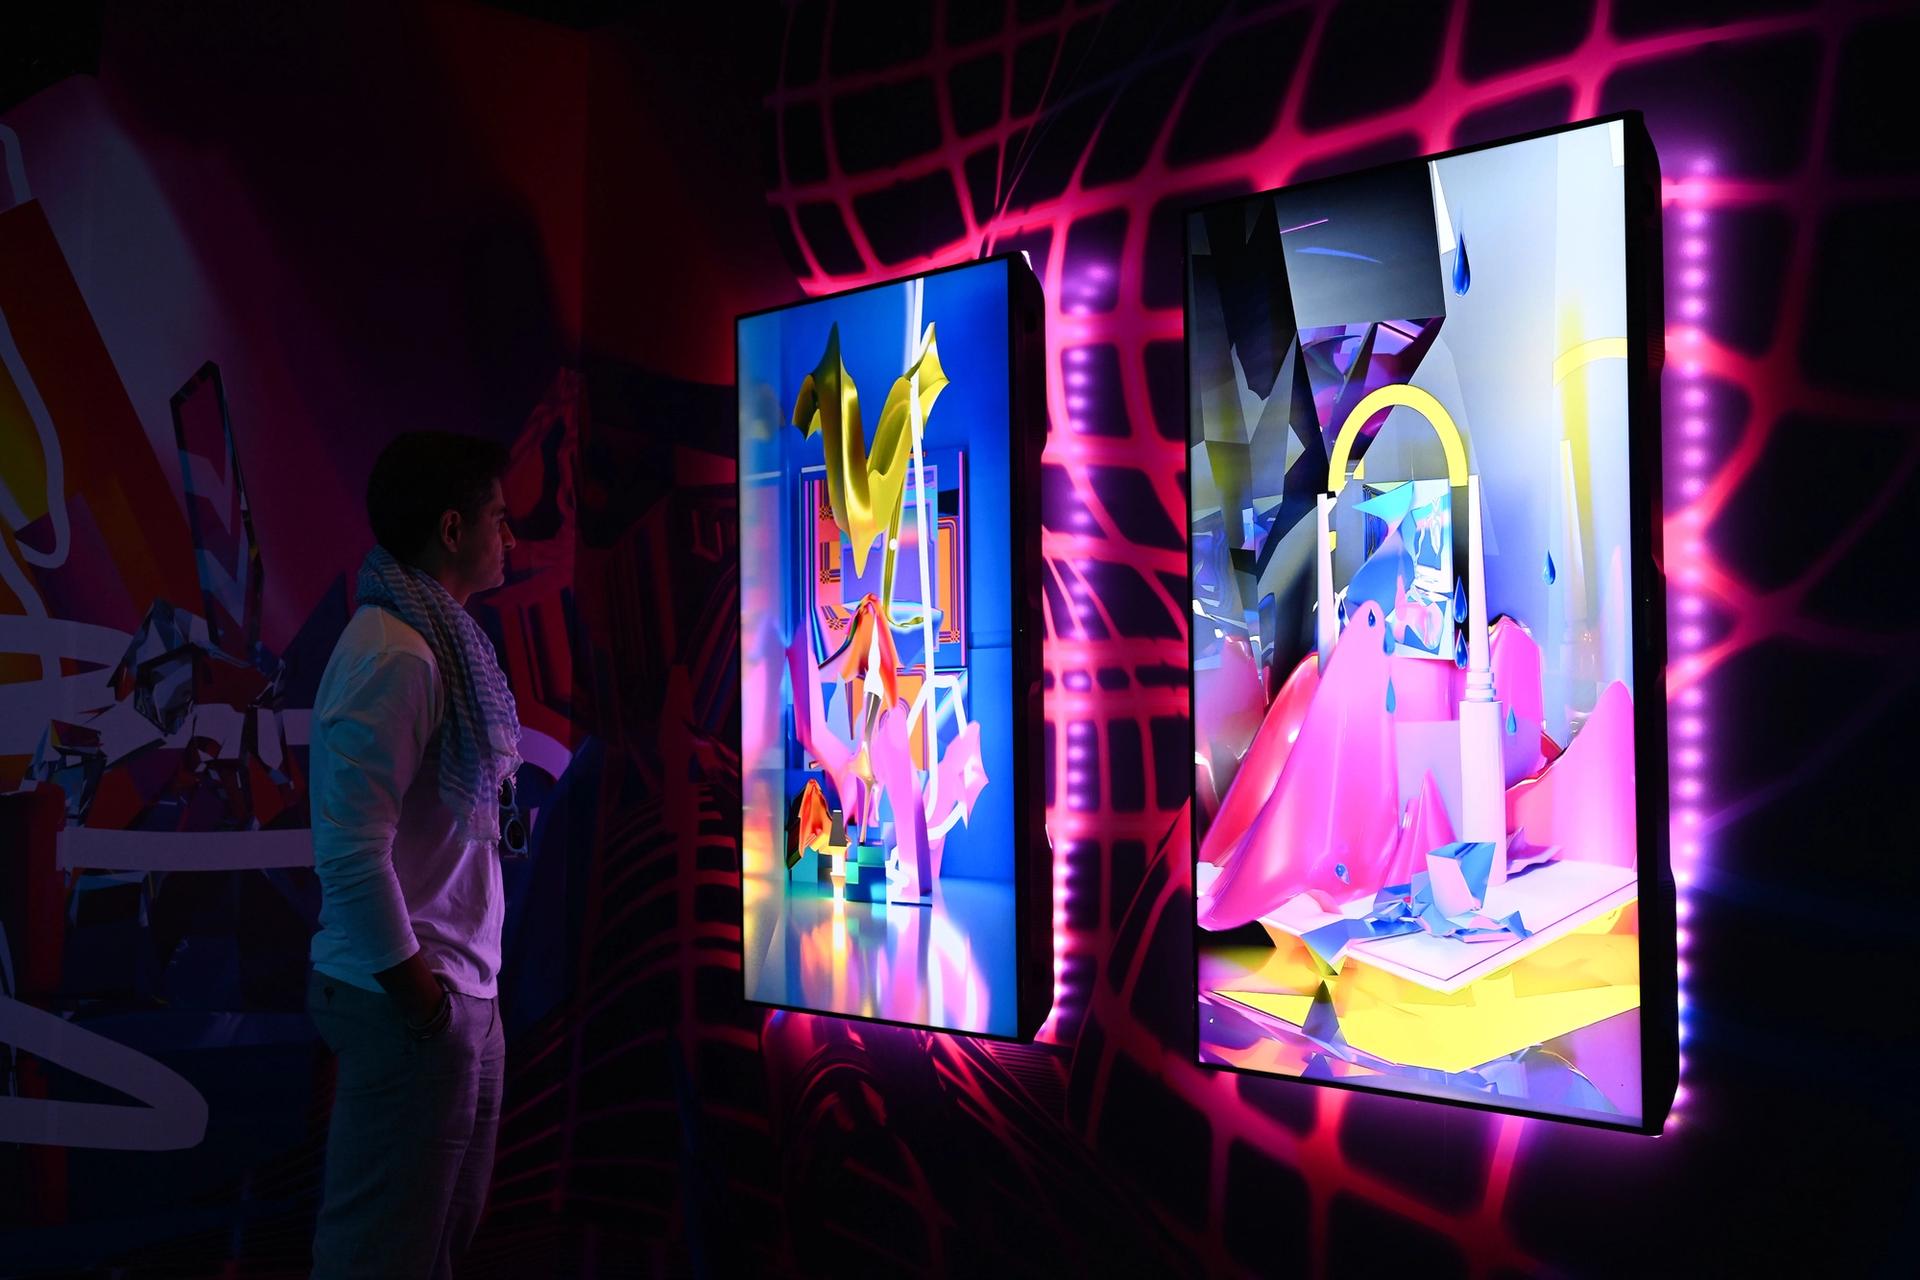 The Art Dubai Digital section is "all dark walls, neon lights, stale air and an unending number of screens in all directions" Photo: Cedric Ribeiro/Getty Images for Art Dubai